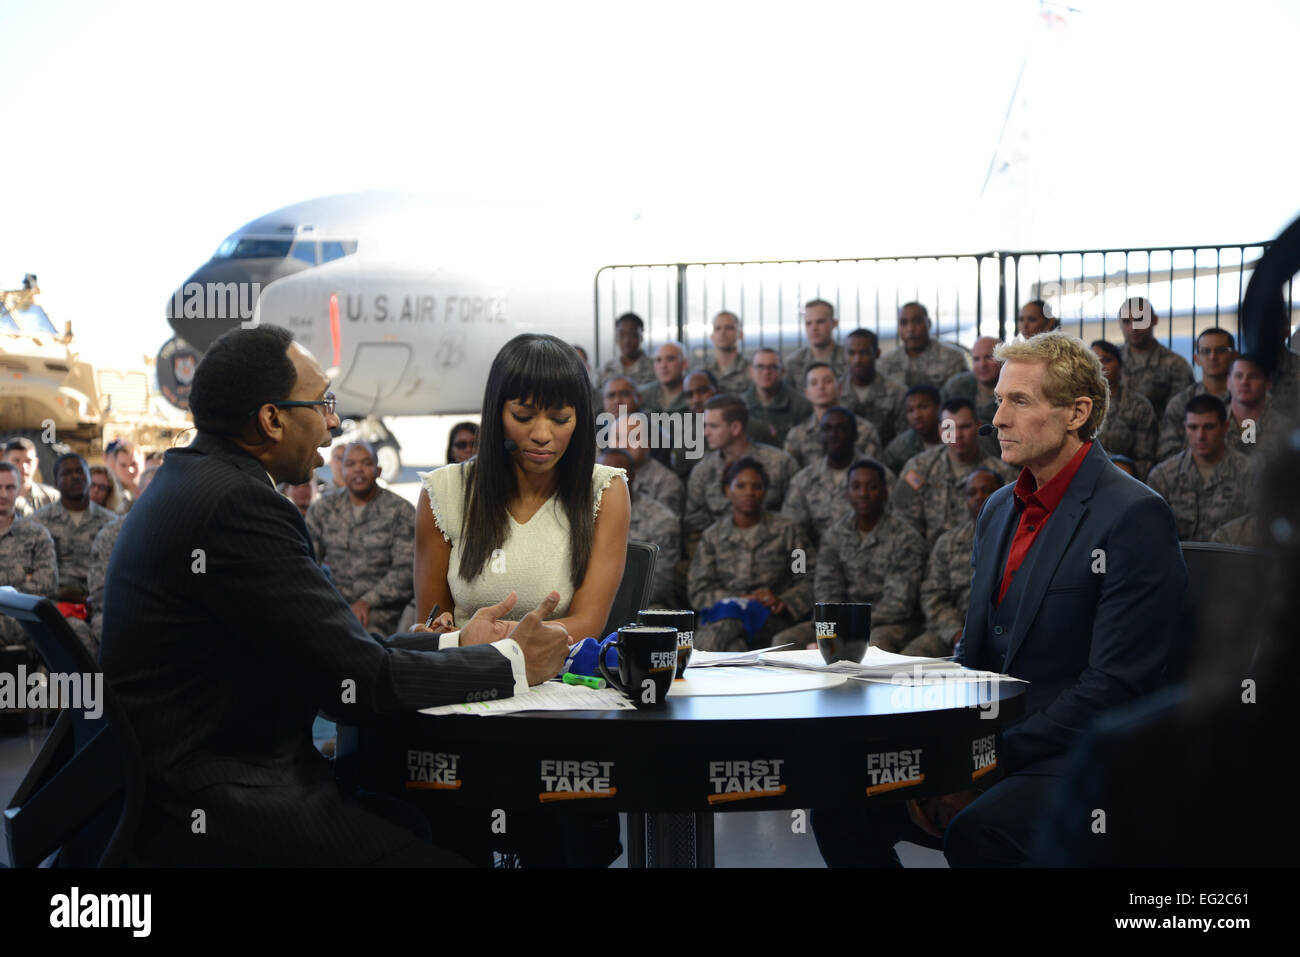 Airmen with the 108th Wing attend a special live broadcast of ESPN’s “First Take” hosted by Stephen A. Smith, Skip Bayless and Cari Champion, Nov. 10, 2014, at Joint Base McGuire-Dix-Lakehurst, N.J. The “Salute the Troops” broadcast, in honor of Veterans Day, was set with a backdrop of a KC-10 Extender, KC-135 Stratotanker and other military vehicles.  Tech. Sgt. Carl Clegg Stock Photo